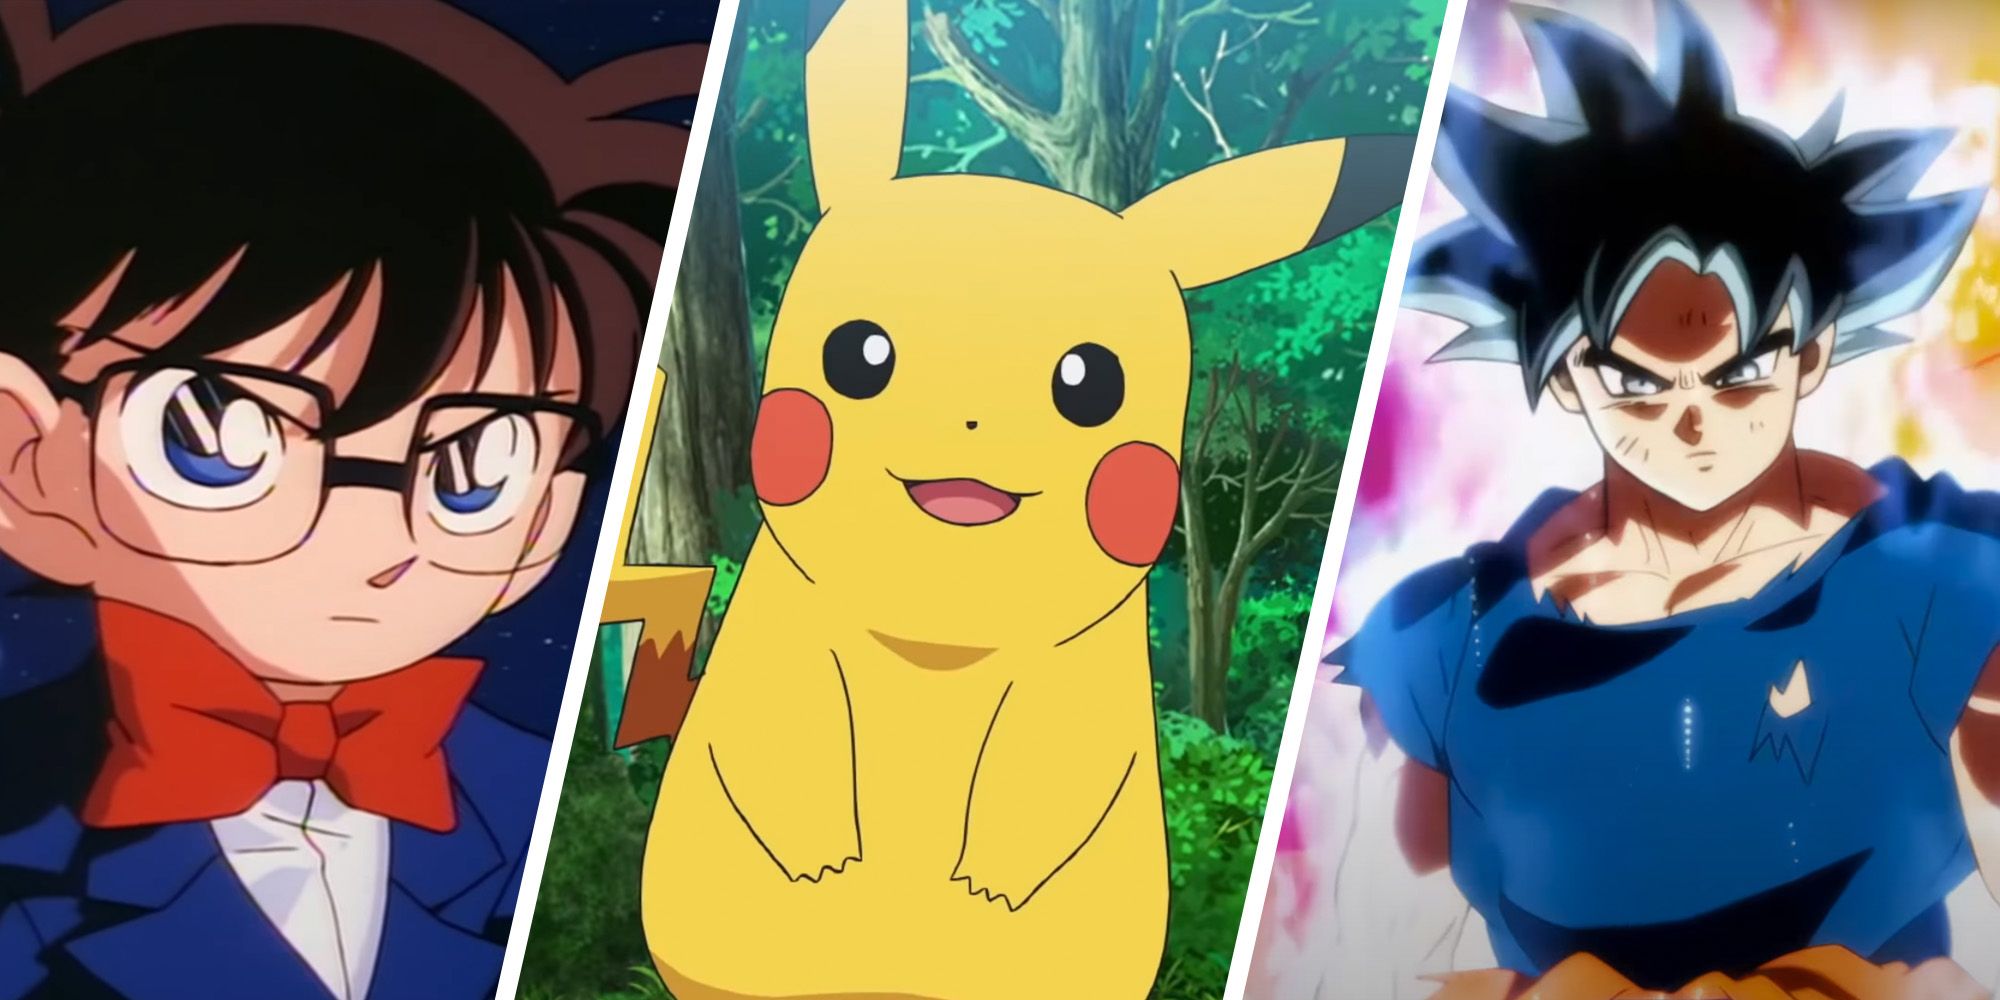 Split image of the anime series Pokemon, Dragon Ball, and Cased Closed